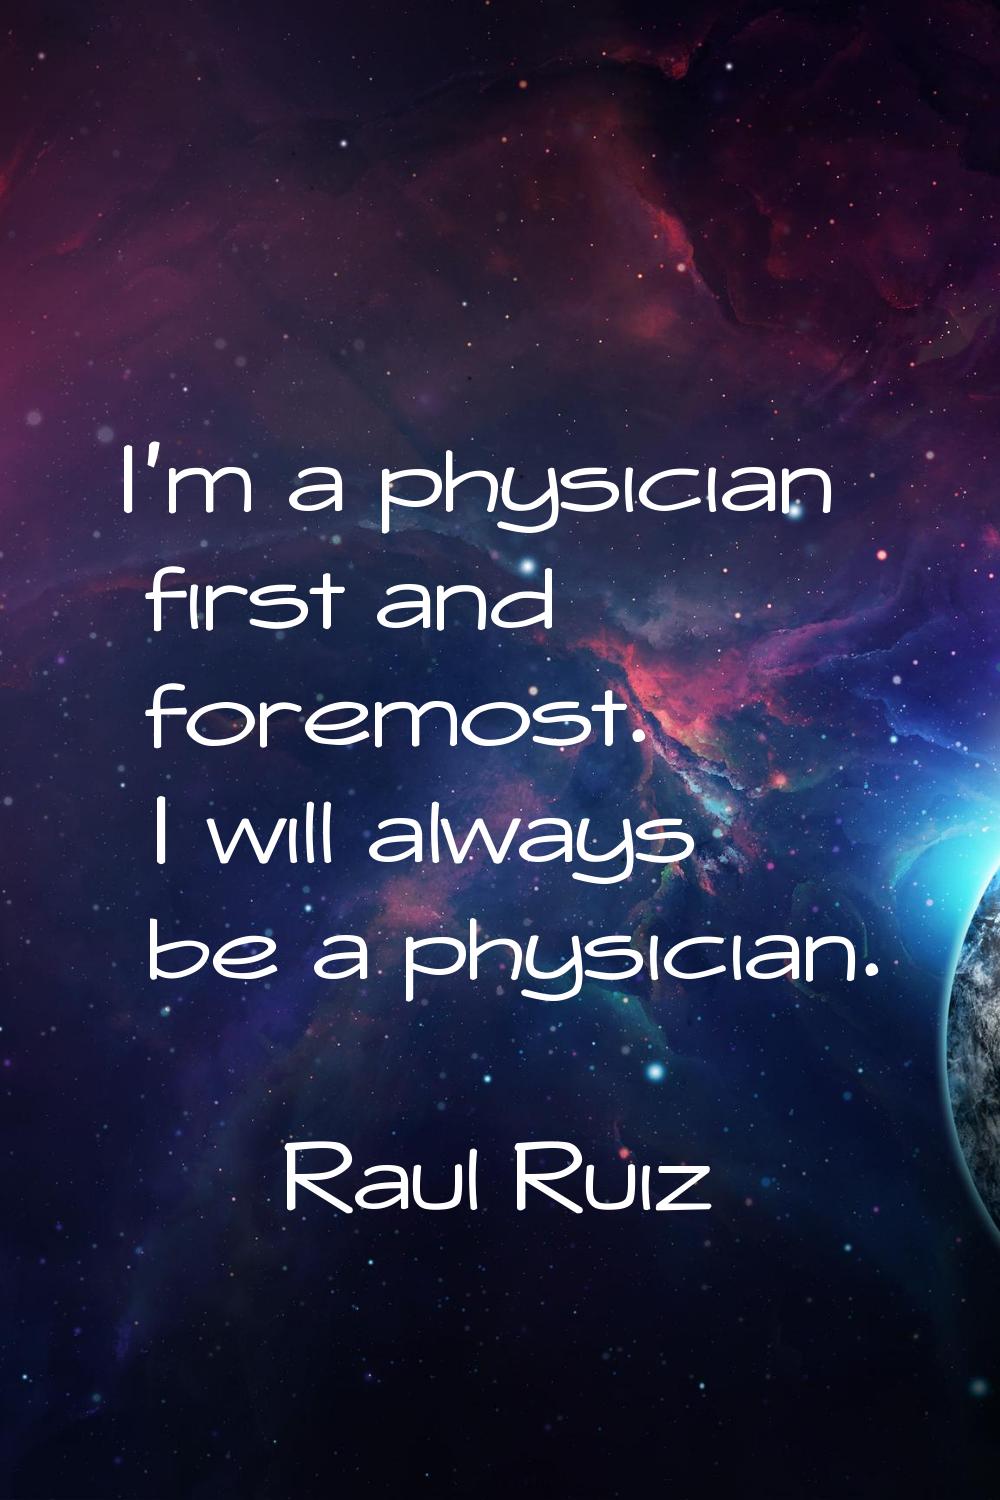 I'm a physician first and foremost. I will always be a physician.